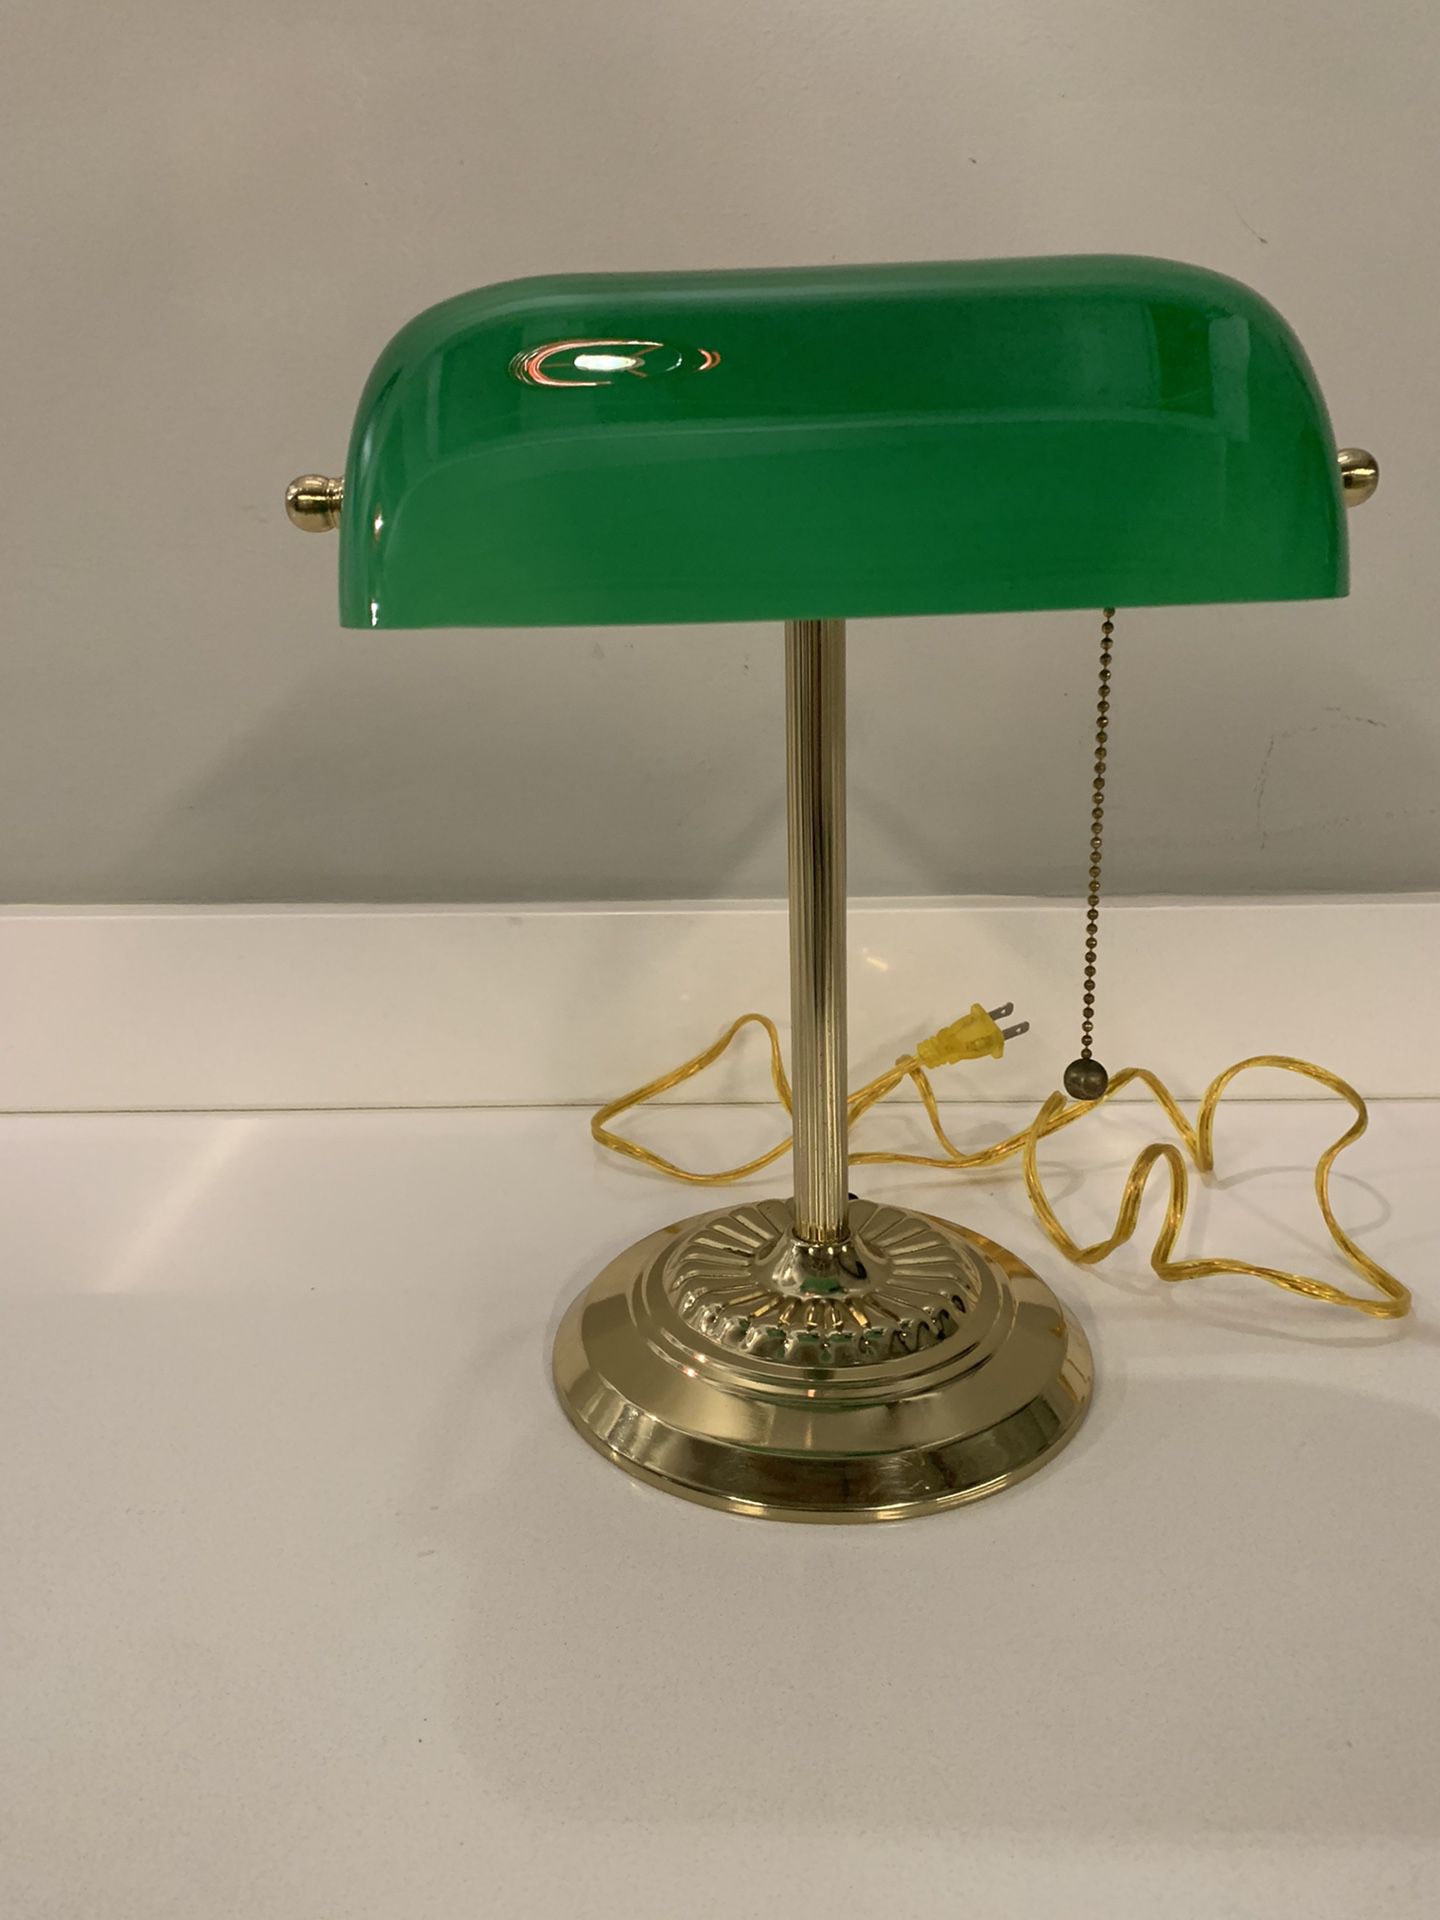 CATALINA Vintage Bankers Desk Lamp Green Glass Shade Antique Table Light *WORKS 14" tall $75 OBO  